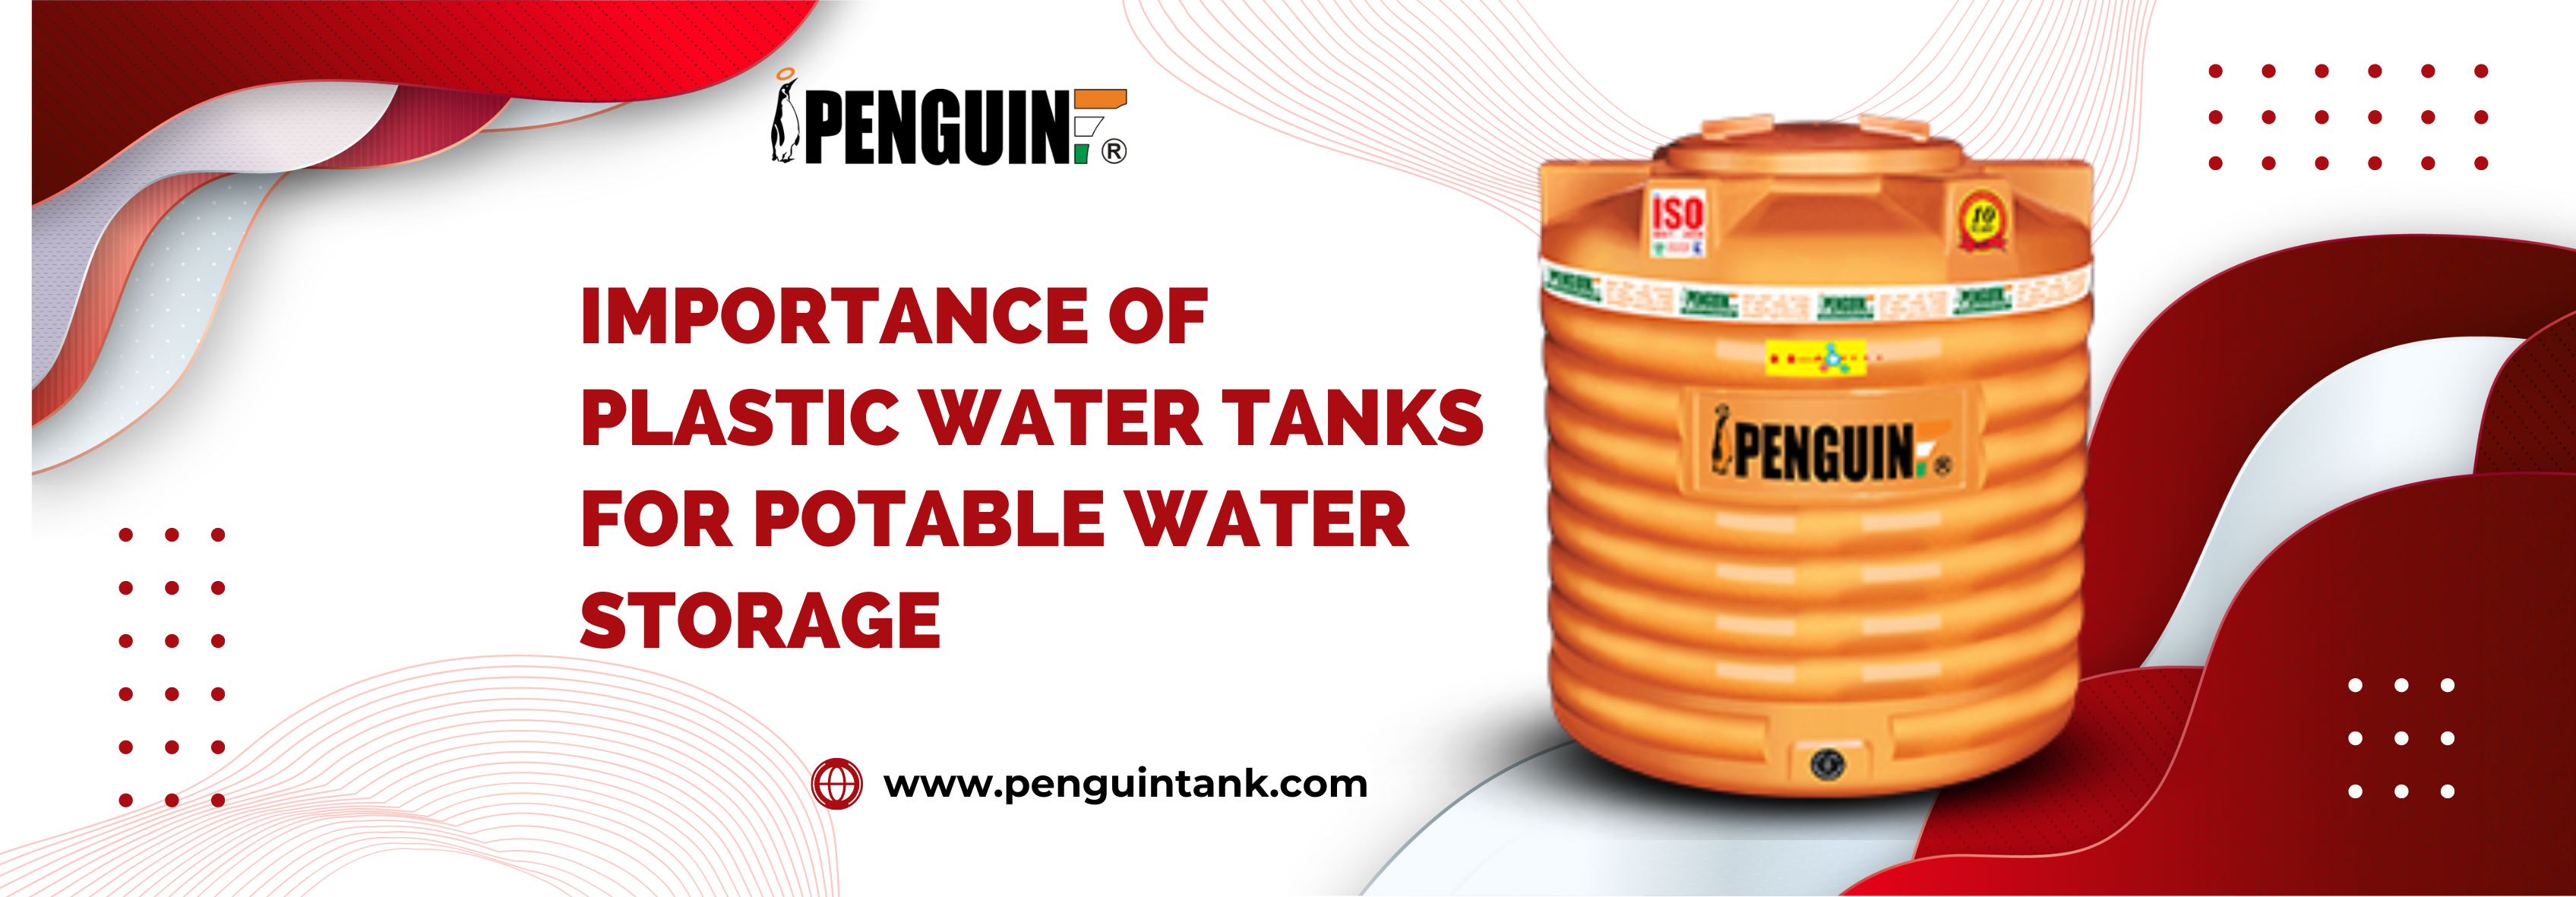 Importance Of Plastic Water Tanks For Potable Water Storage